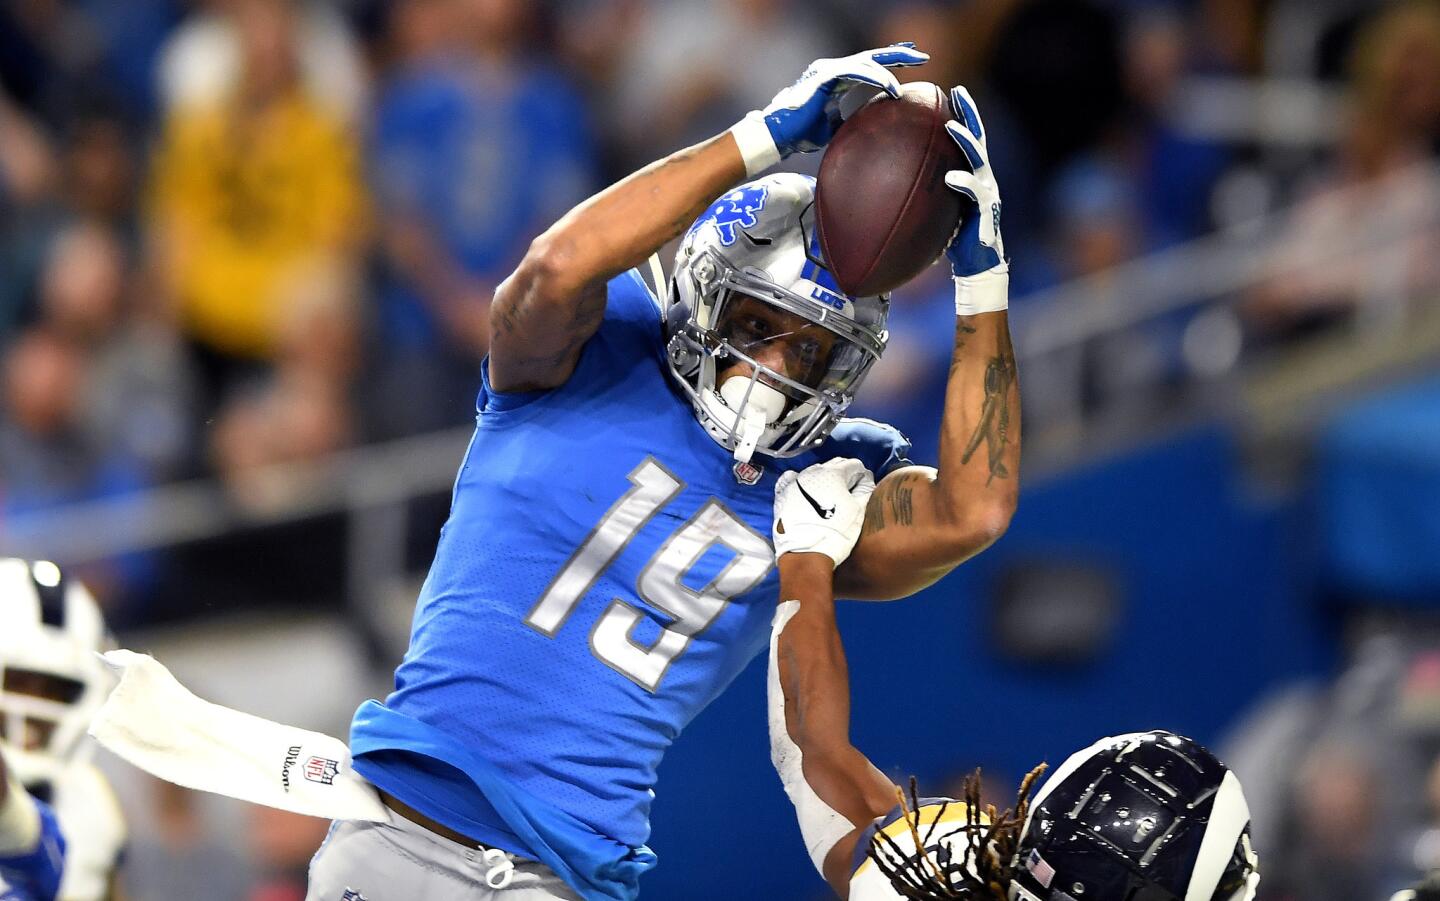 Detroit Lions receiver Kenny Golladay cacthes a pass in the end zone against the Rams but is ruled out of bounds in the fourth quarter at Ford Field in Detroit on Sunday.